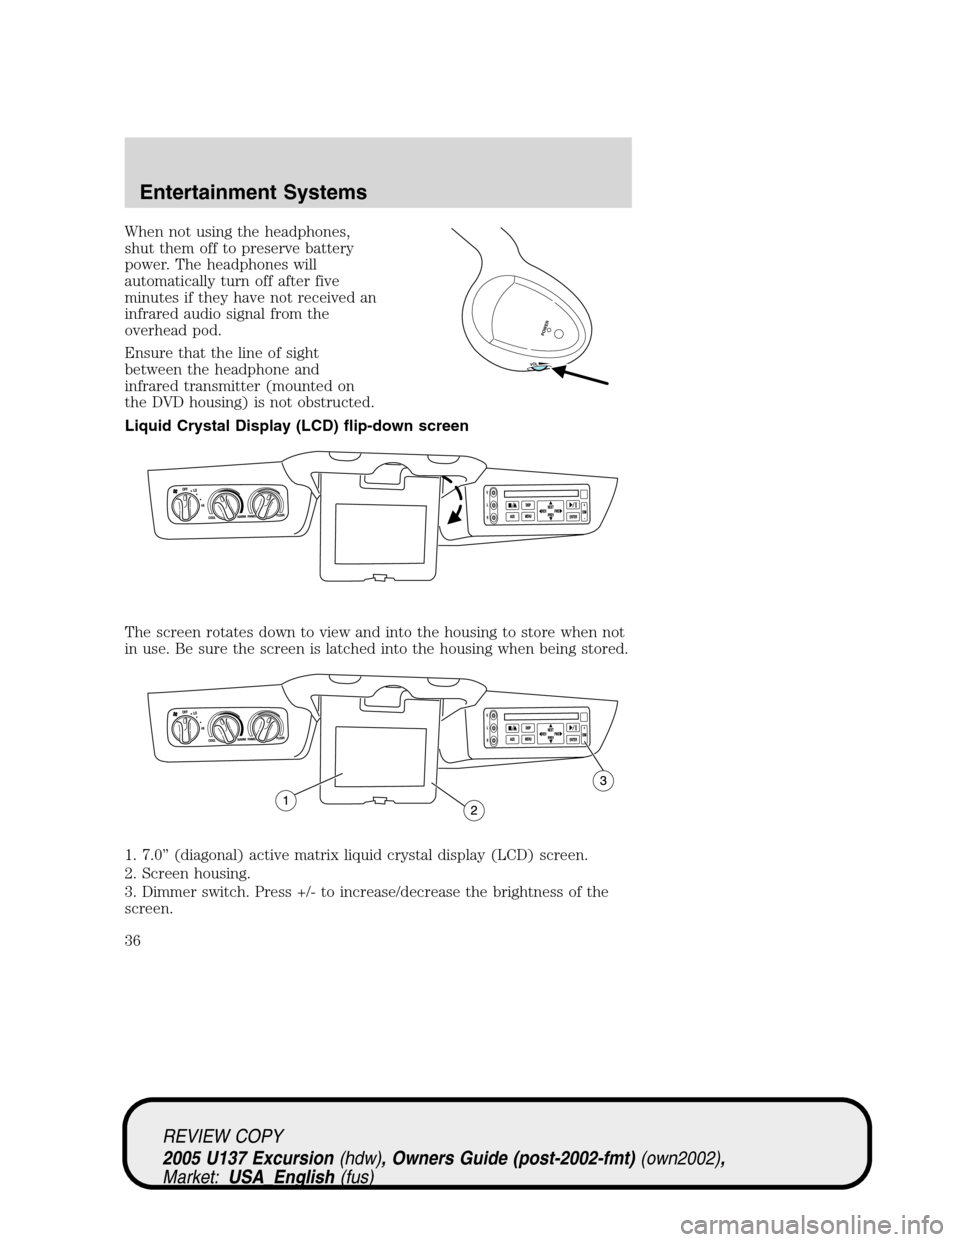 FORD EXCURSION 2005 1.G Owners Guide When not using the headphones,
shut them off to preserve battery
power. The headphones will
automatically turn off after five
minutes if they have not received an
infrared audio signal from the
overhe